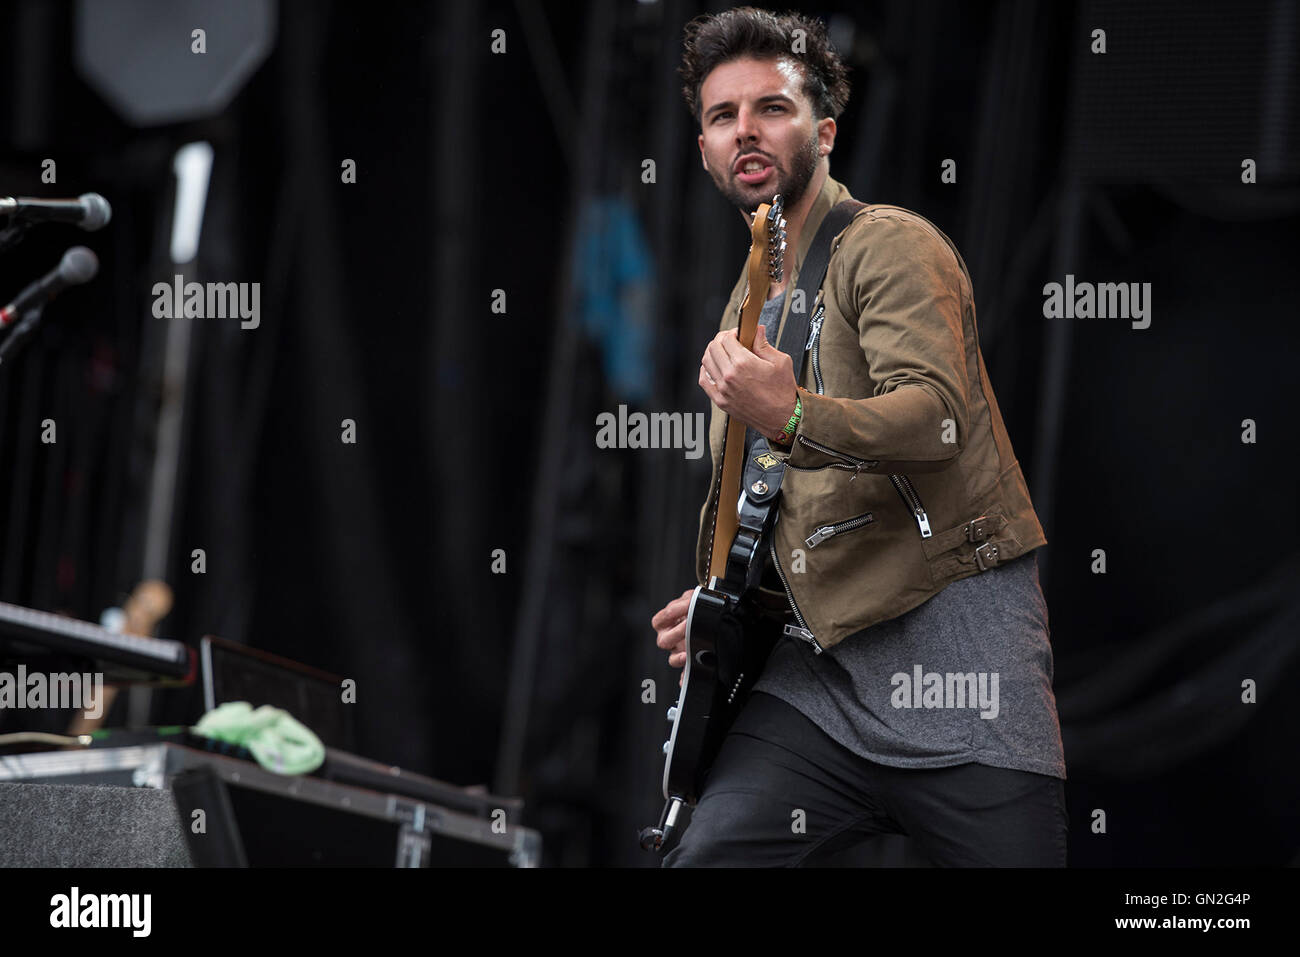 Leeds, UK. 27th August 2016. Conor Mason, Joe Langridge-Brown, Dom Craik, Philip Blake and James Price of Nothing But Thieves perform on the main stage at Leeds Festival 2016, 27/08/2016 Credit:  Gary Mather/Alamy Live News Stock Photo